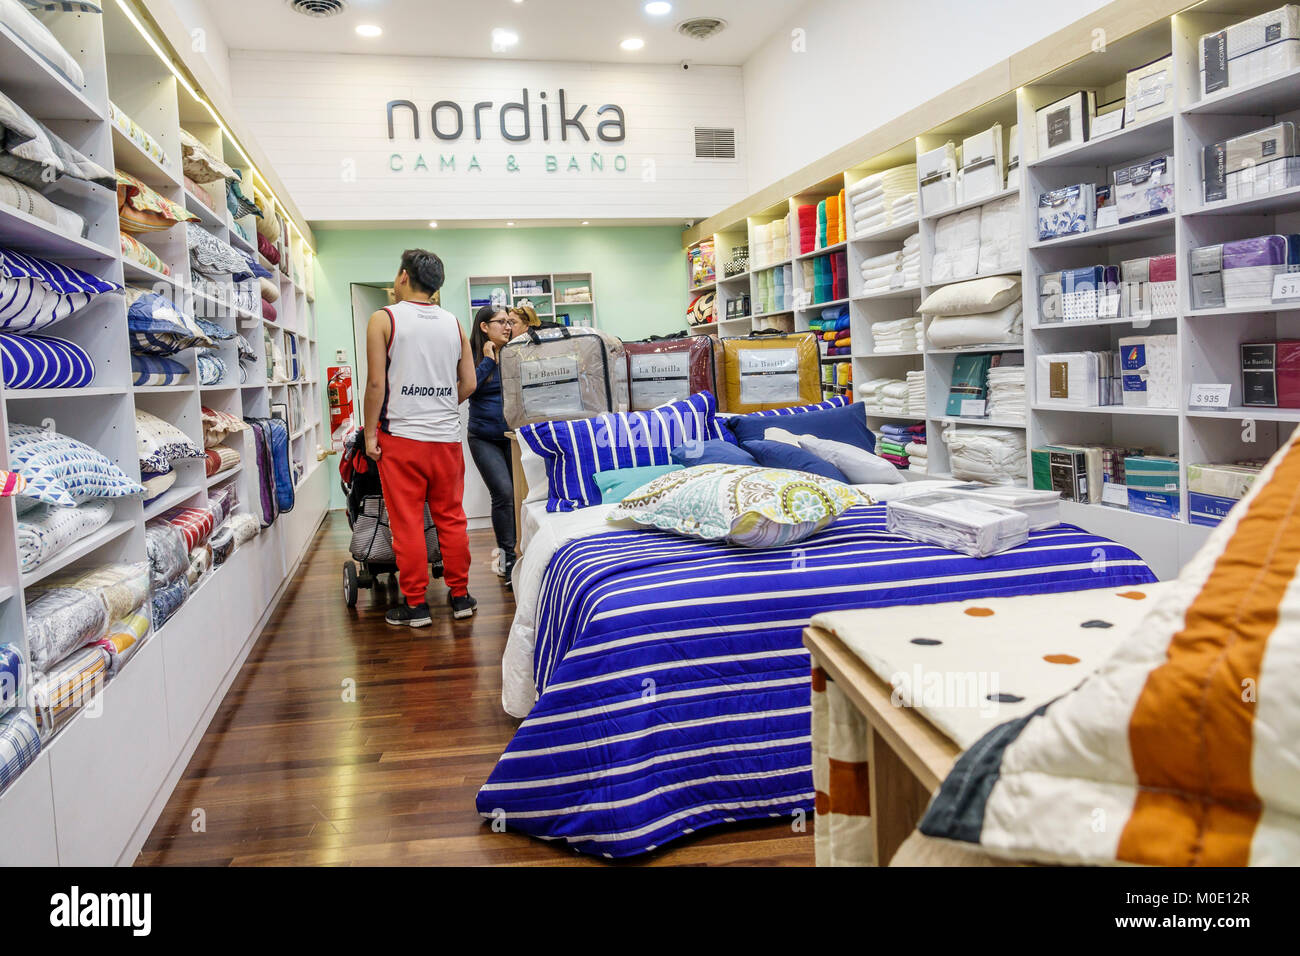 Buenos Aires Argentina,Abasto Shopping Mall,Nordika,home  goods,store,bedding,bed linens,shopping shopper shoppers shop shops market  markets marketplac Stock Photo - Alamy